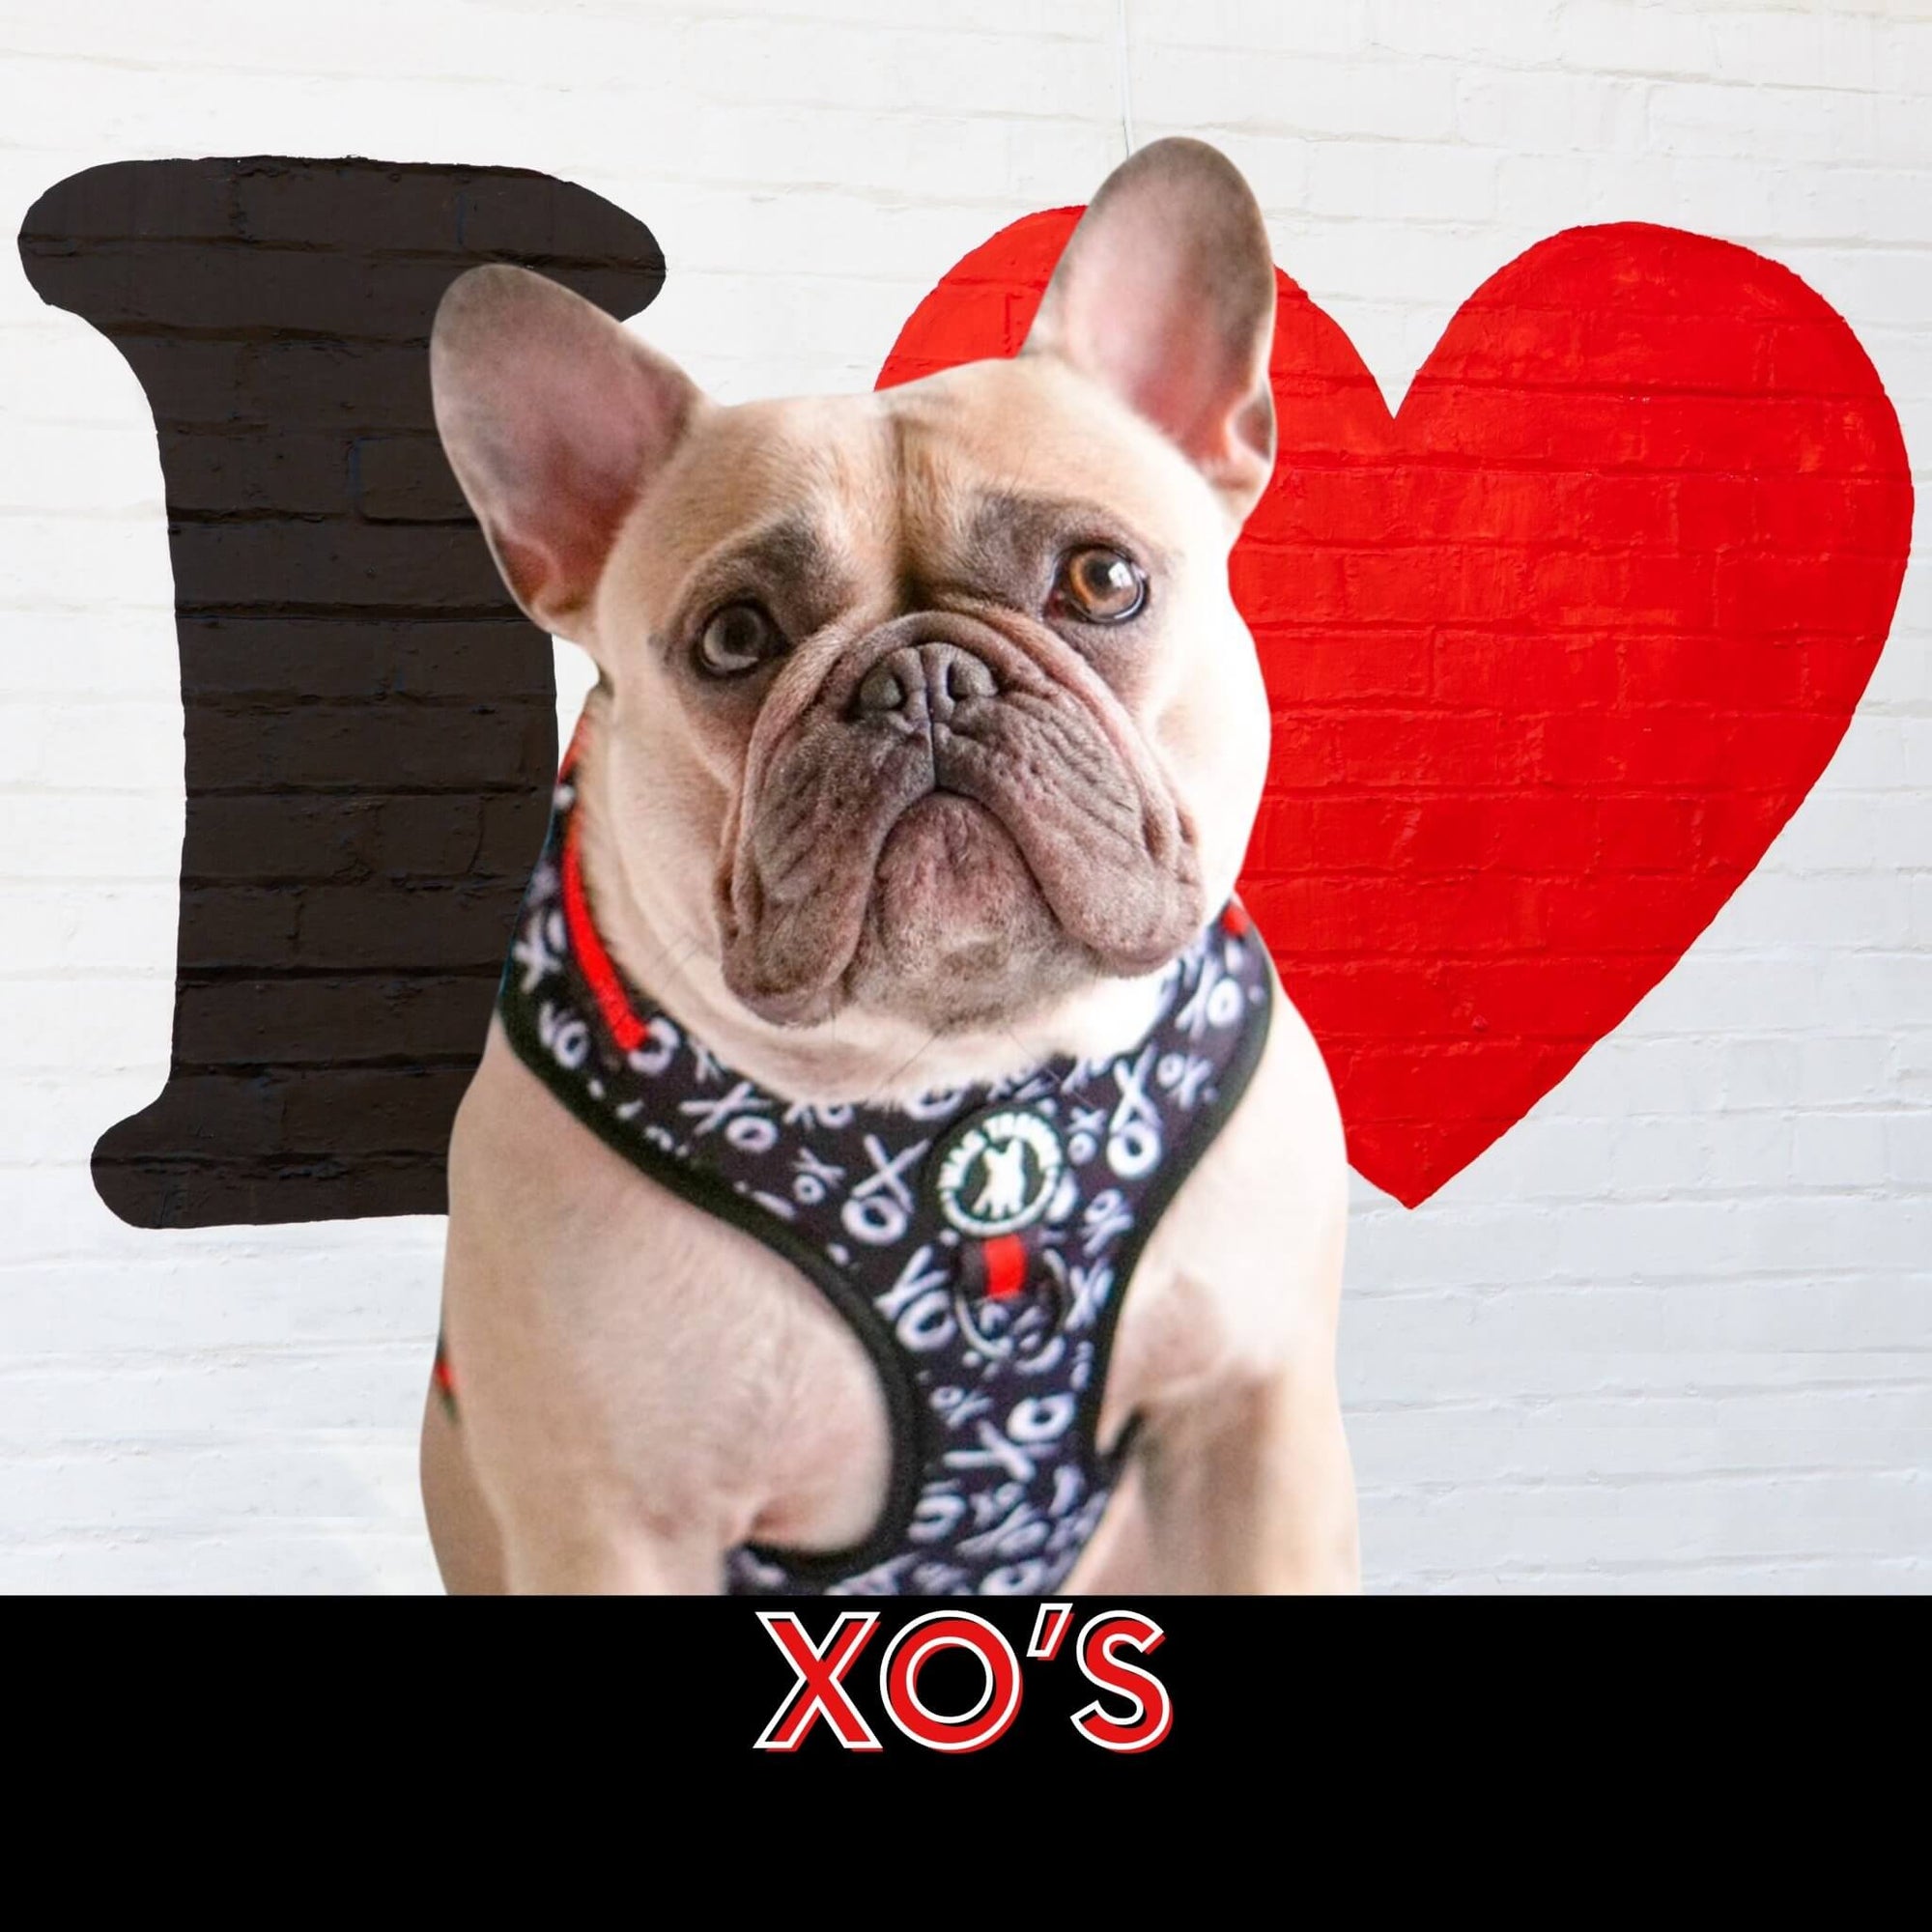 No Pull Dog Harness in XO worn by French Bulldog against a white background with a black letter I and red heart on the wall